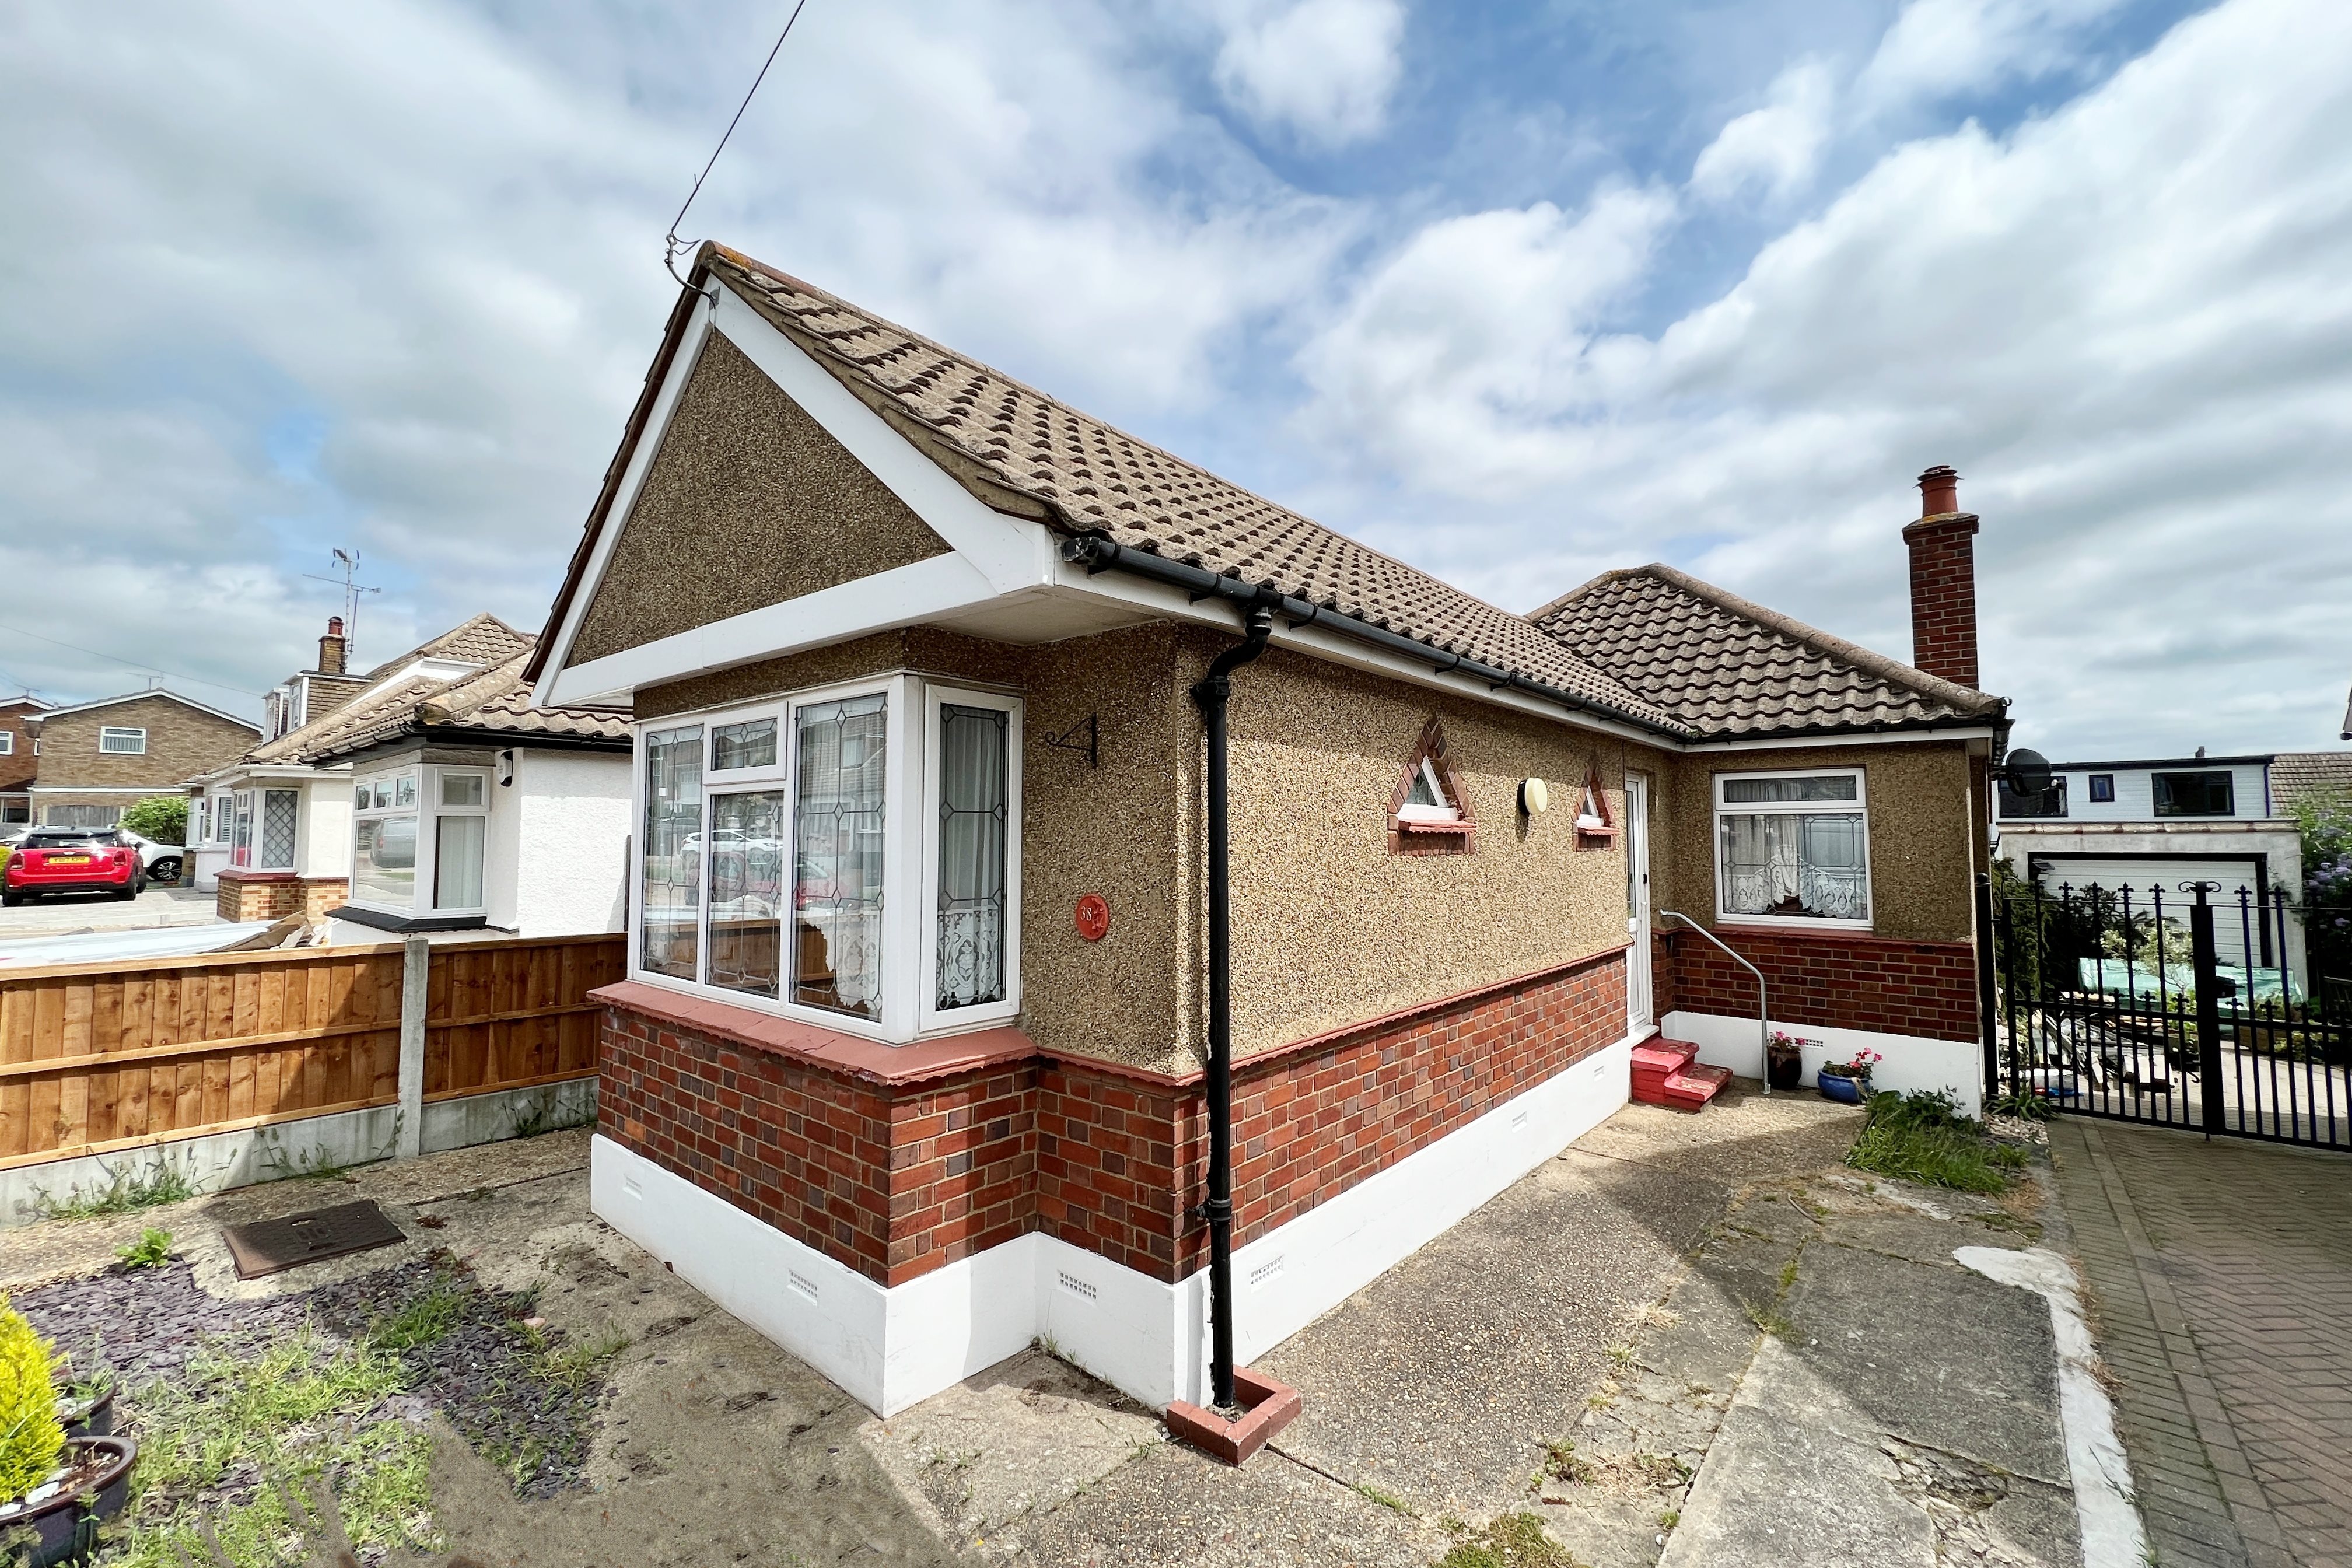 3 bed bungalow to rent in Fairfield Crescent (EPC Exempt), Eastwood, SS9 